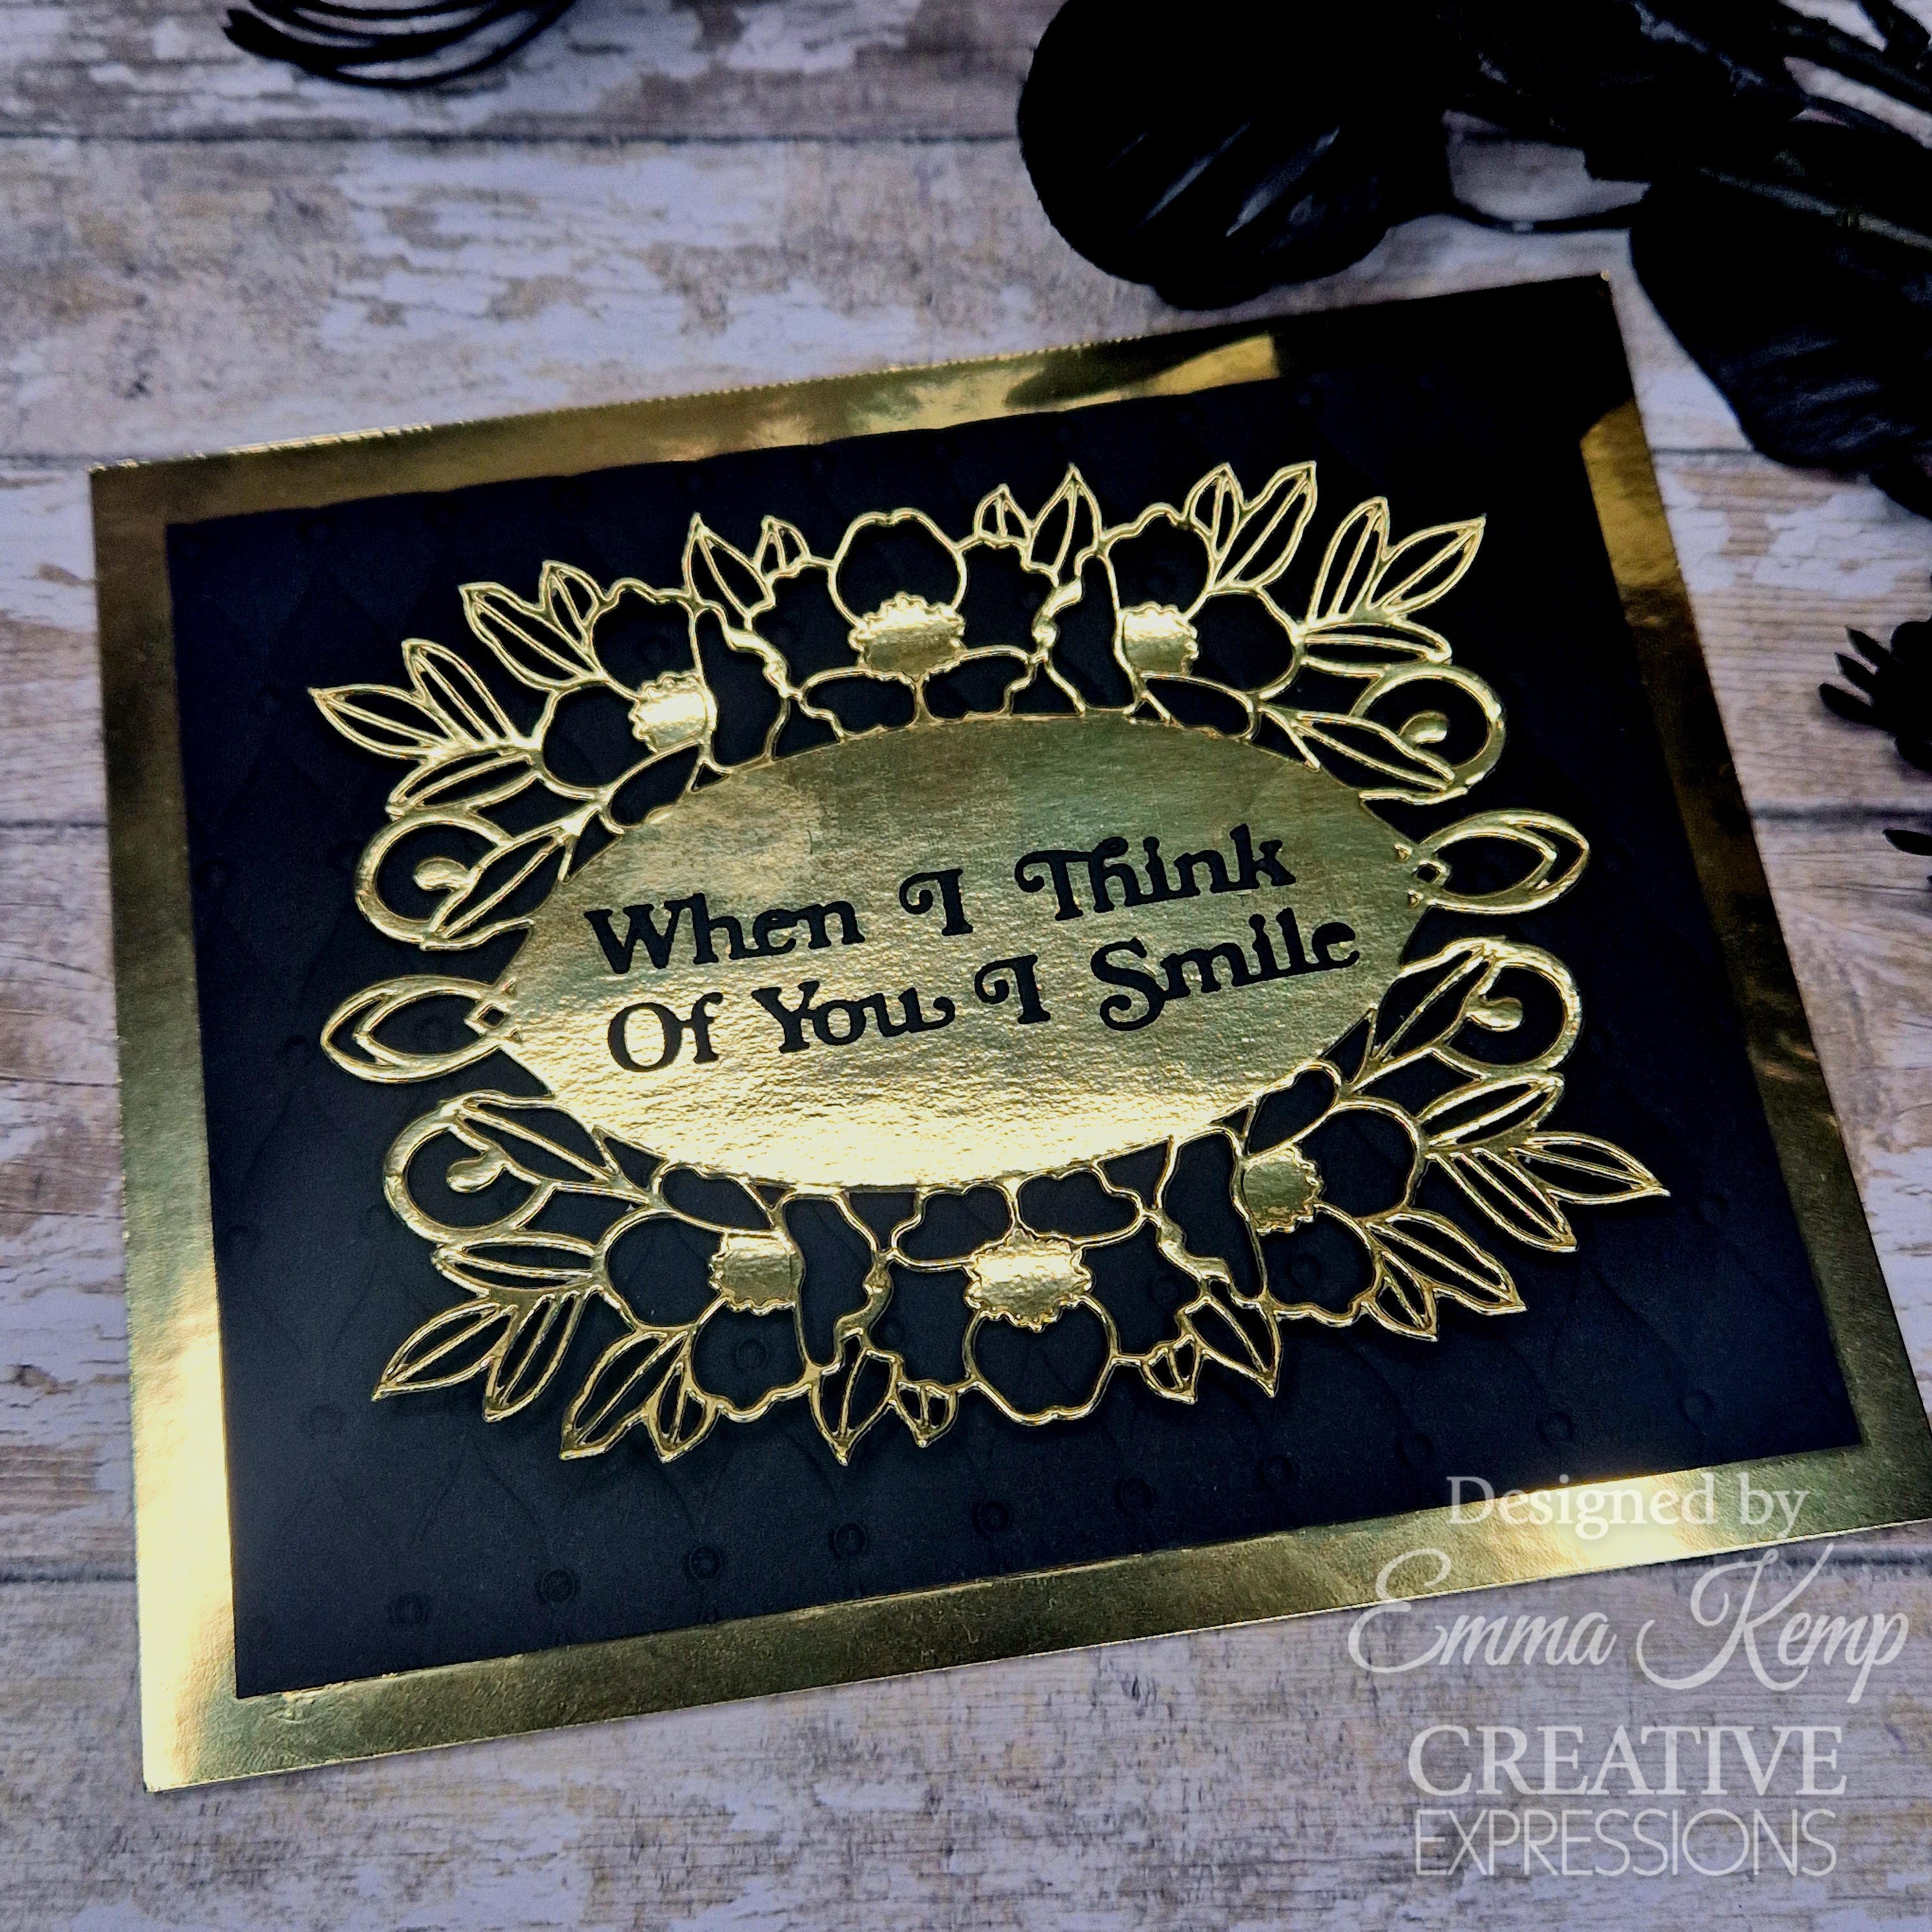 Creative Expressions Sue Wilson Mini Shadowed Sentiments I Smile When I Think Of You Craft Die